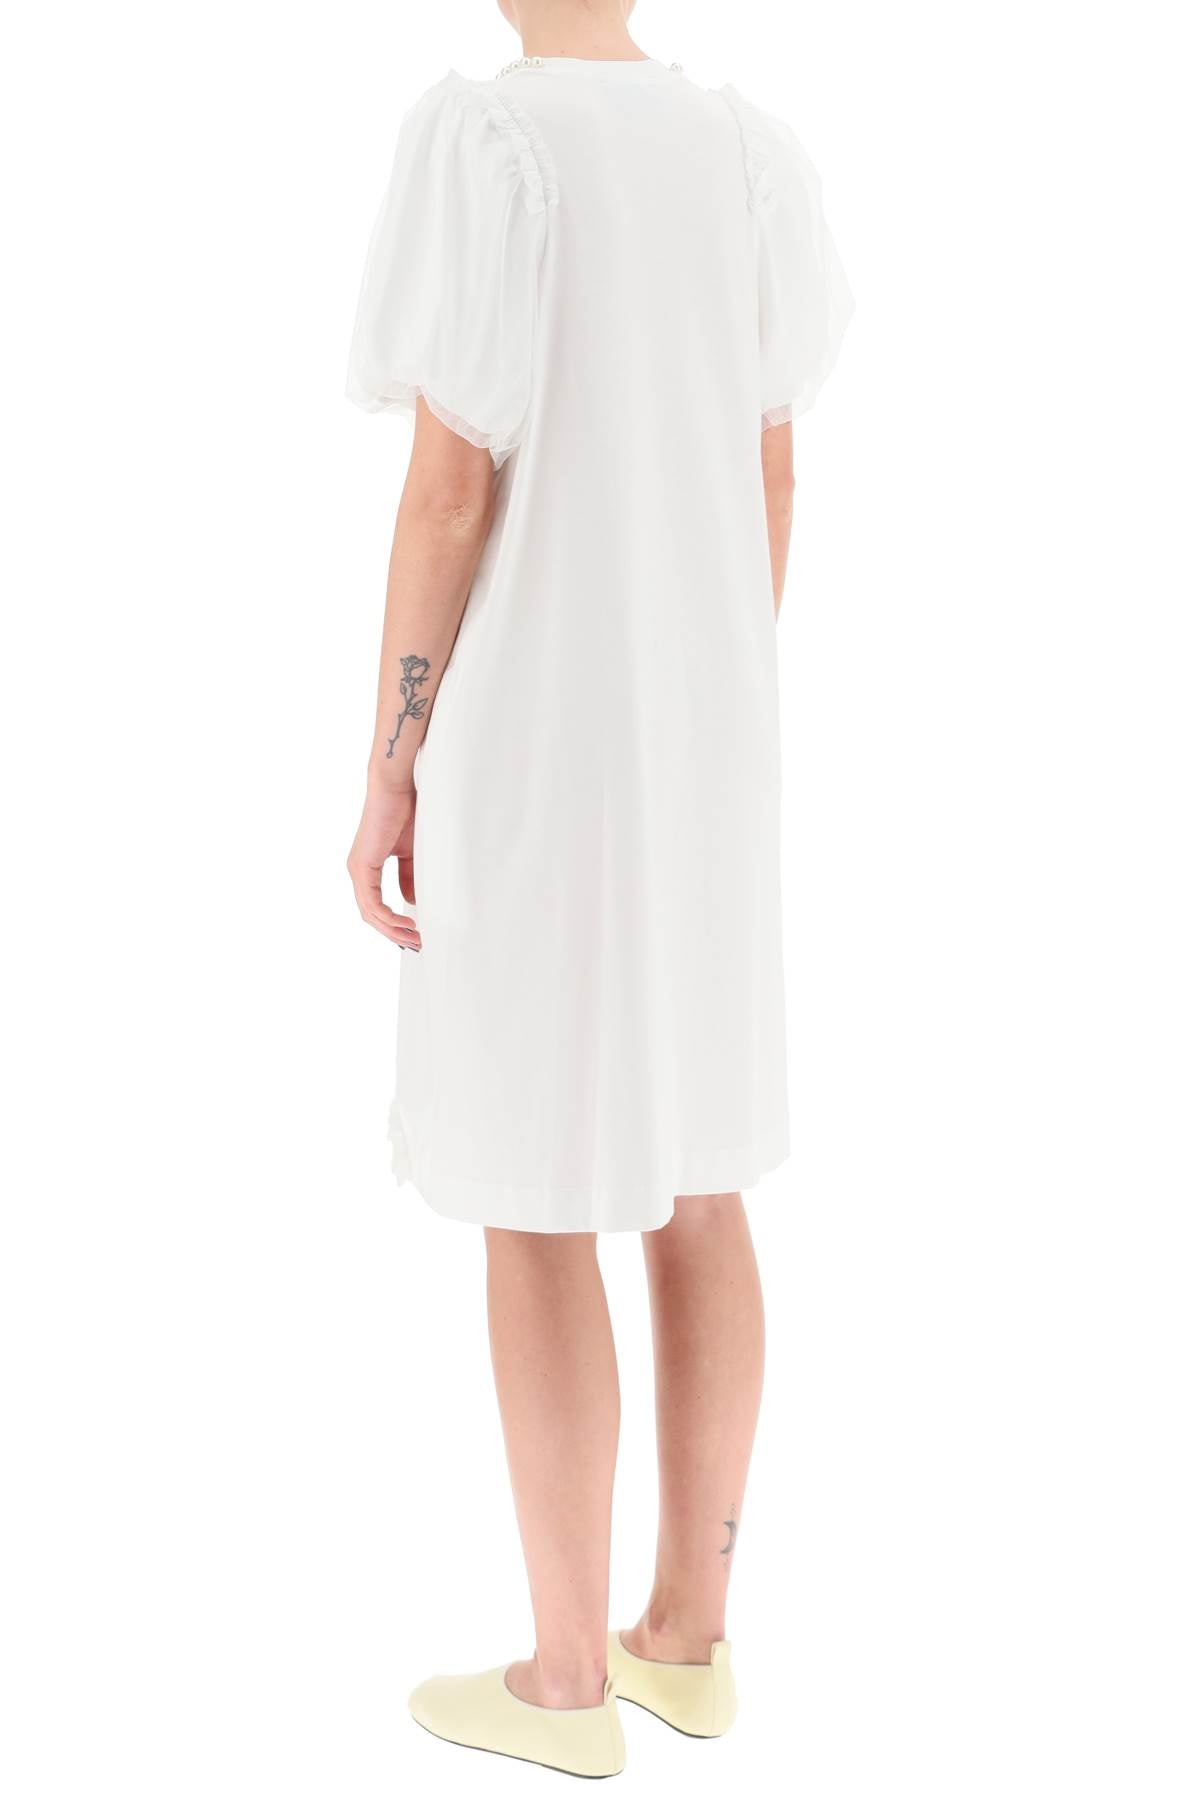 SIMONE ROCHA White Knee-Length T-Shirt Dress with Tulle Sleeves and Pearl Embellishments for Women